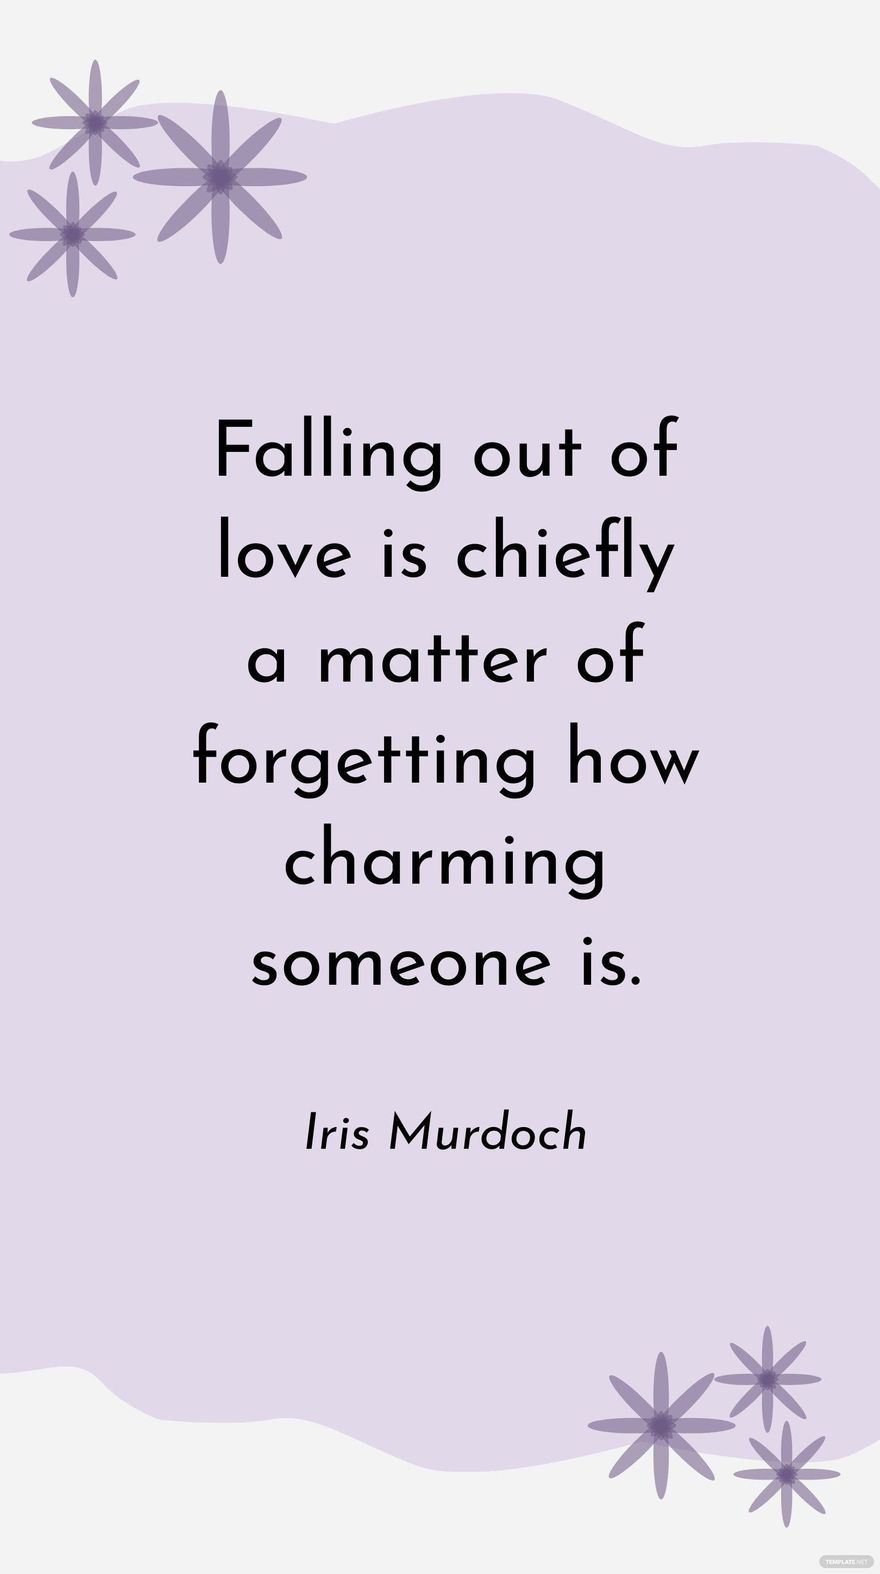 Iris Murdoch - Falling out of love is chiefly a matter of forgetting how charming someone is. in JPG